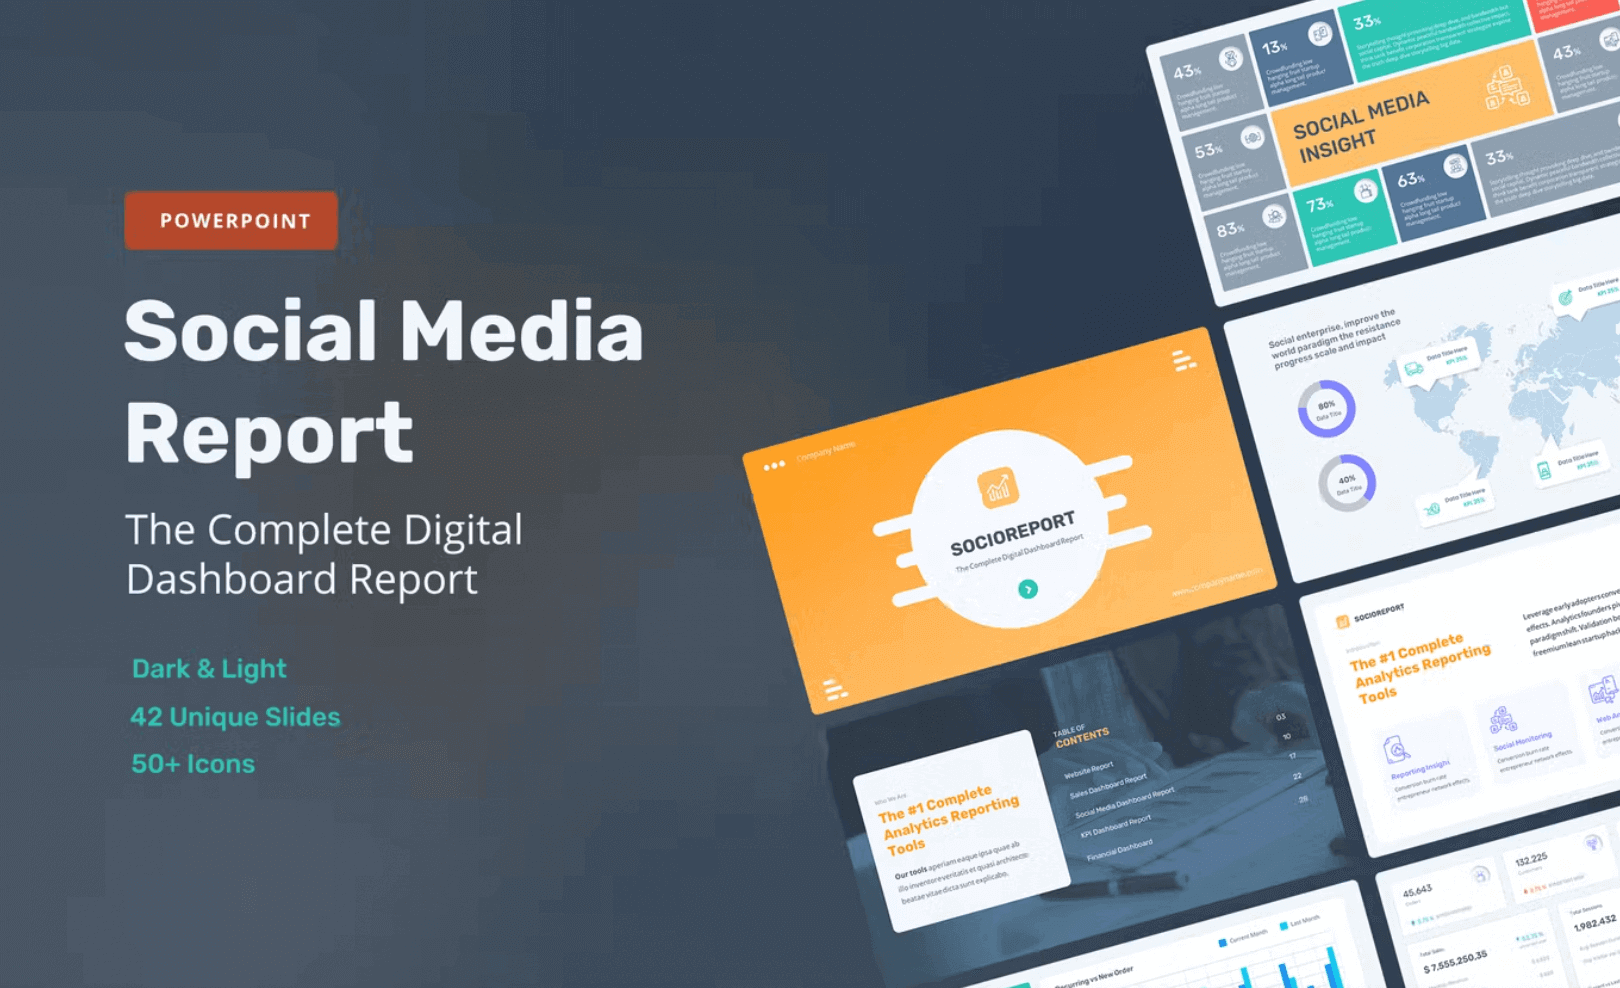 Social Media PowerPoint Presentaion Template pack by appiqa.